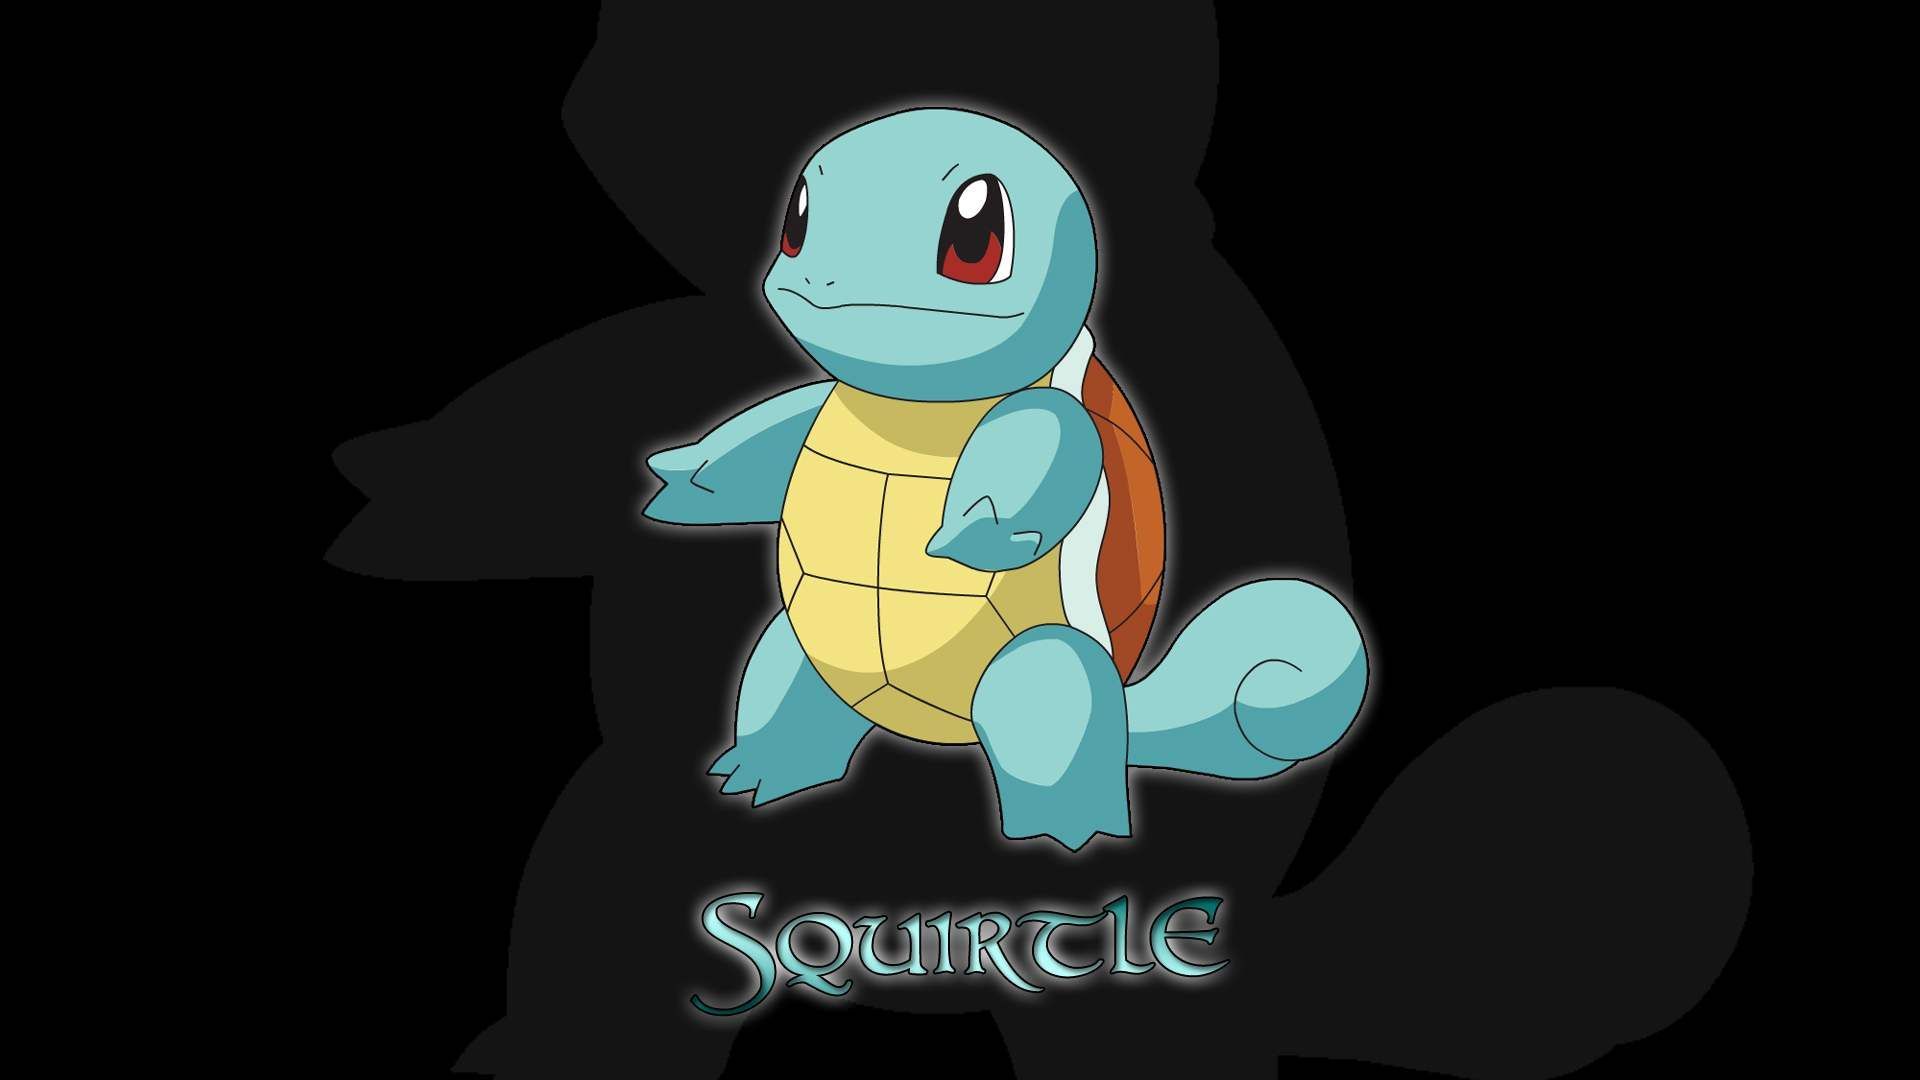 Wallpapers Totodile Images Of Squirtle 1920x1080 | #73790 #totodile